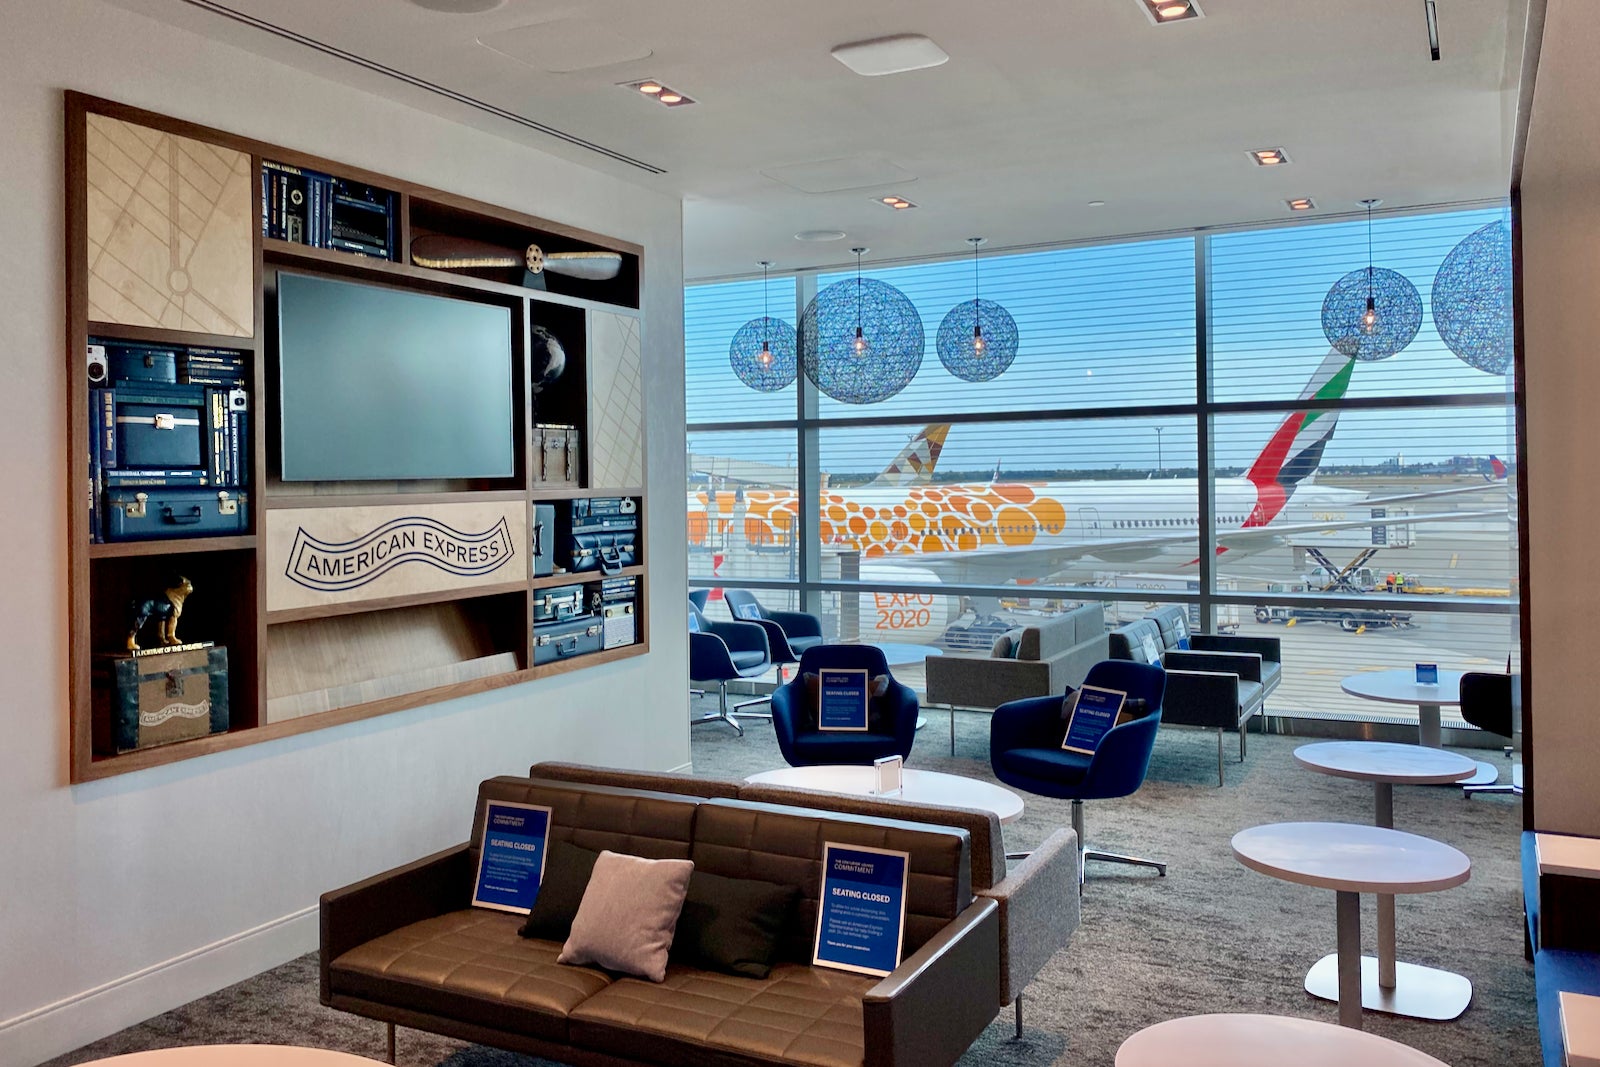 Lounge access with the Amex Platinum Card